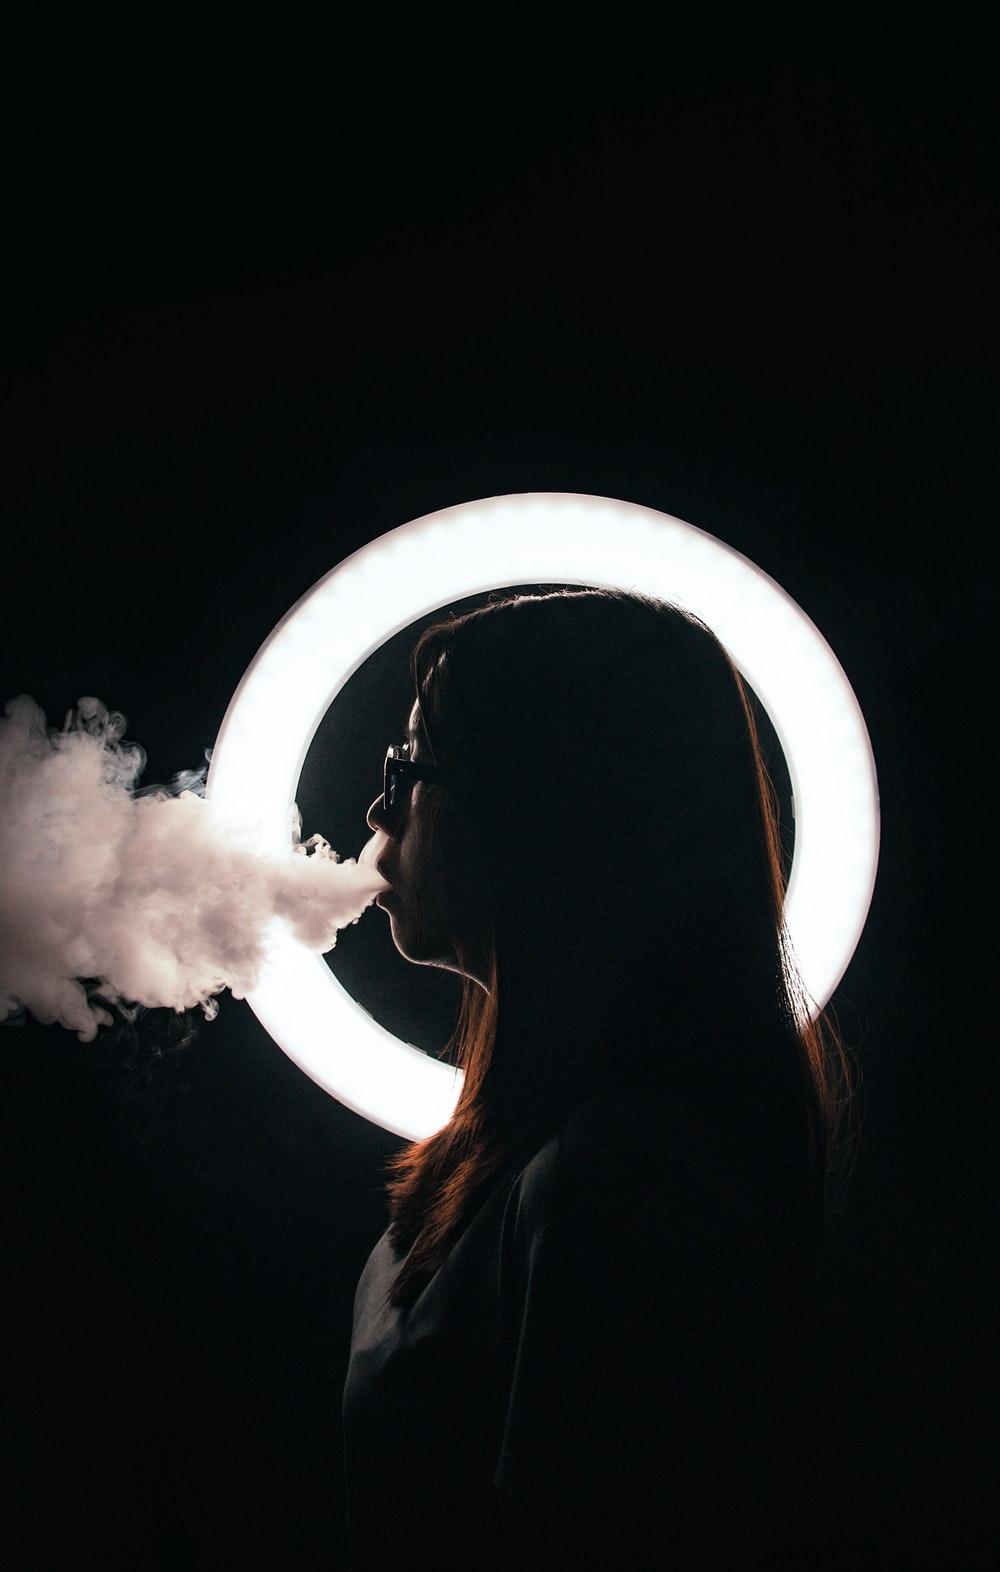 Vaping Picture [HD]. Download Free Image